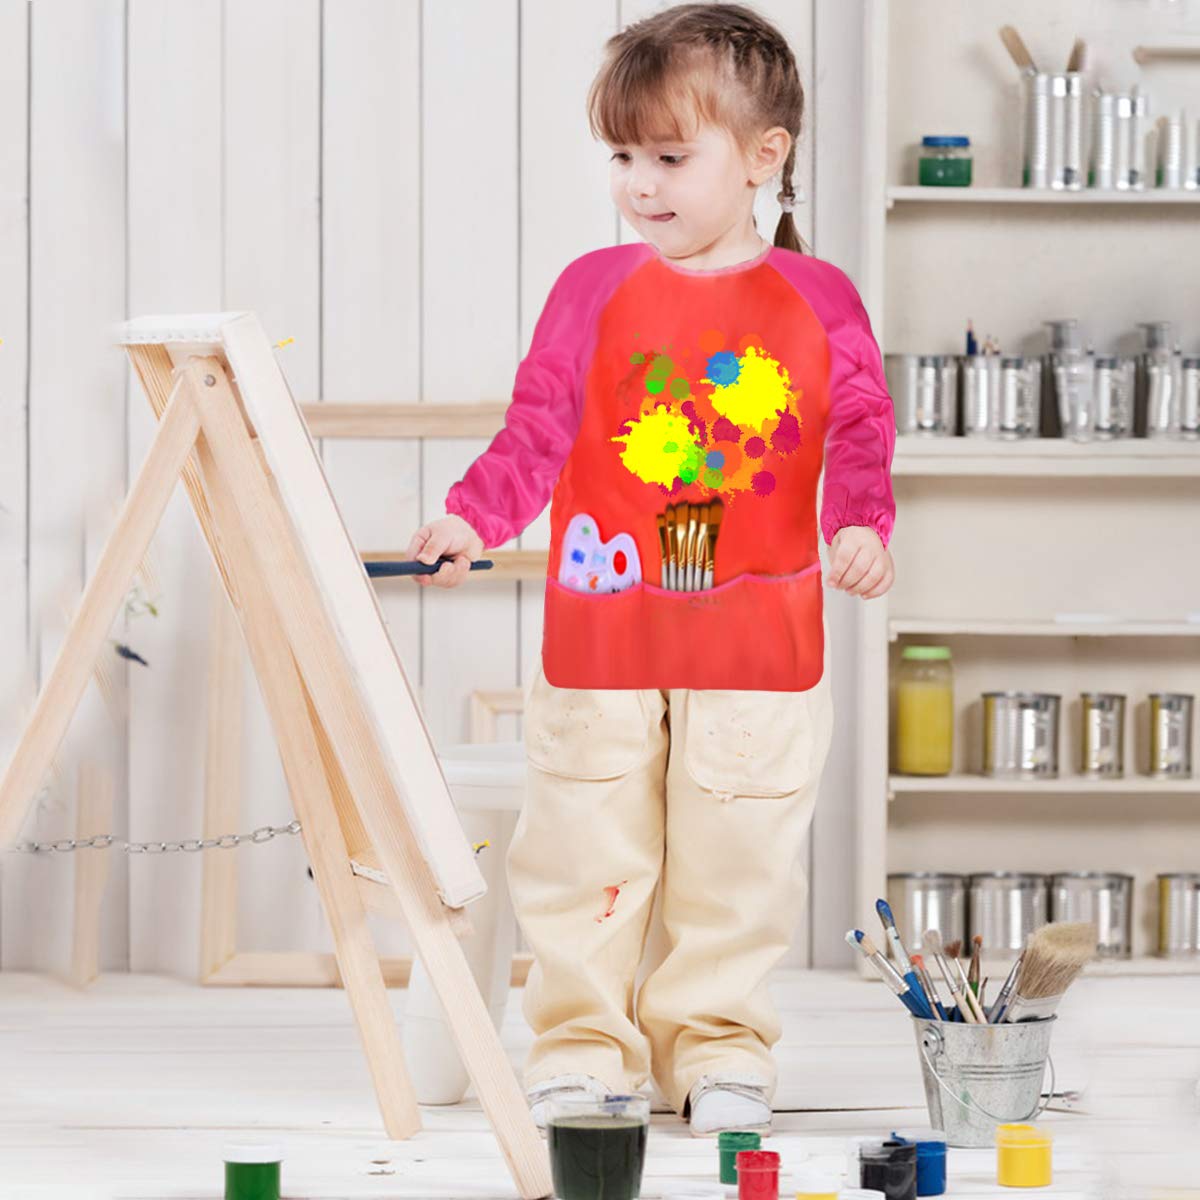 Dreampark 2 Pack Children Art Smock Kids Art Aprons with Waterproof Long Sleeve 3 Roomy Pockets, Ages 2-6, Red and Blue (Paints and Brushes not Included)